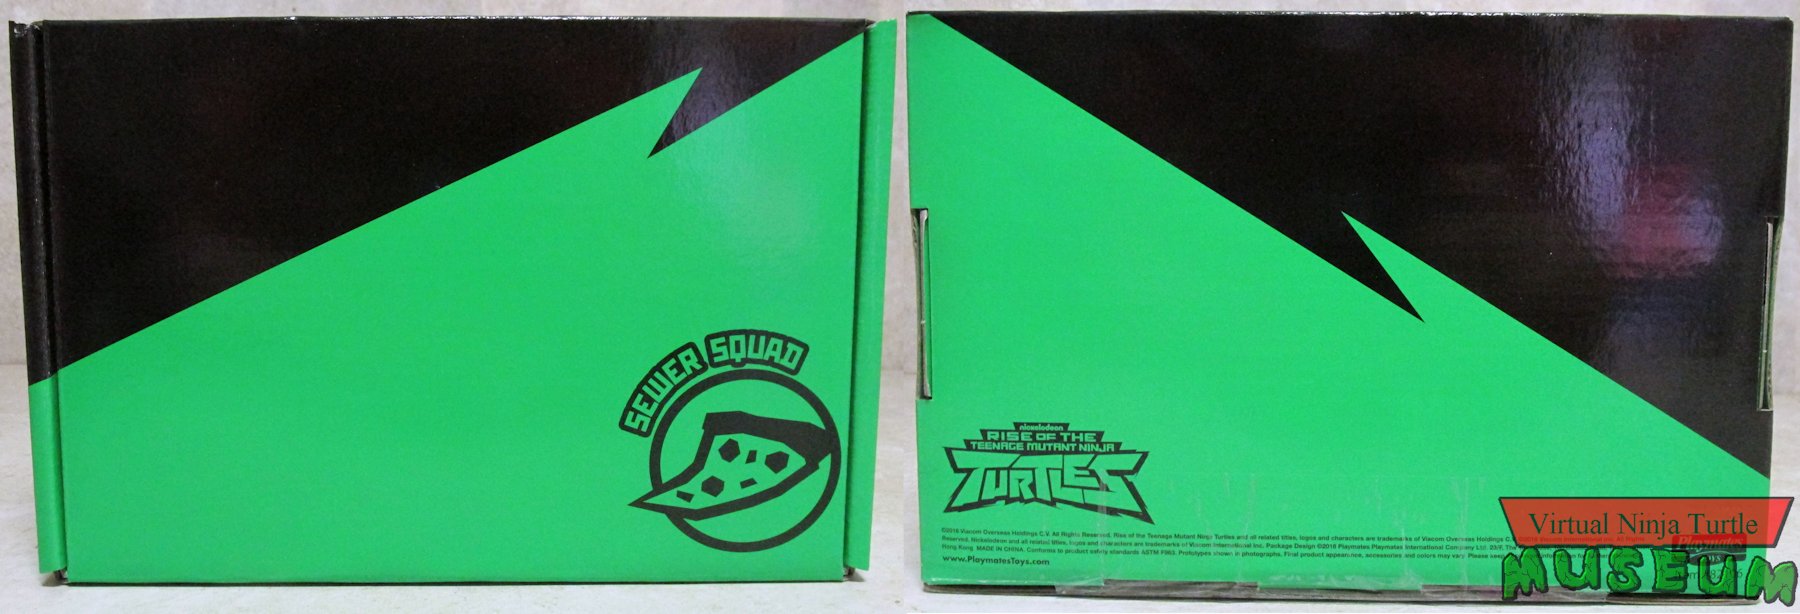 box front and back